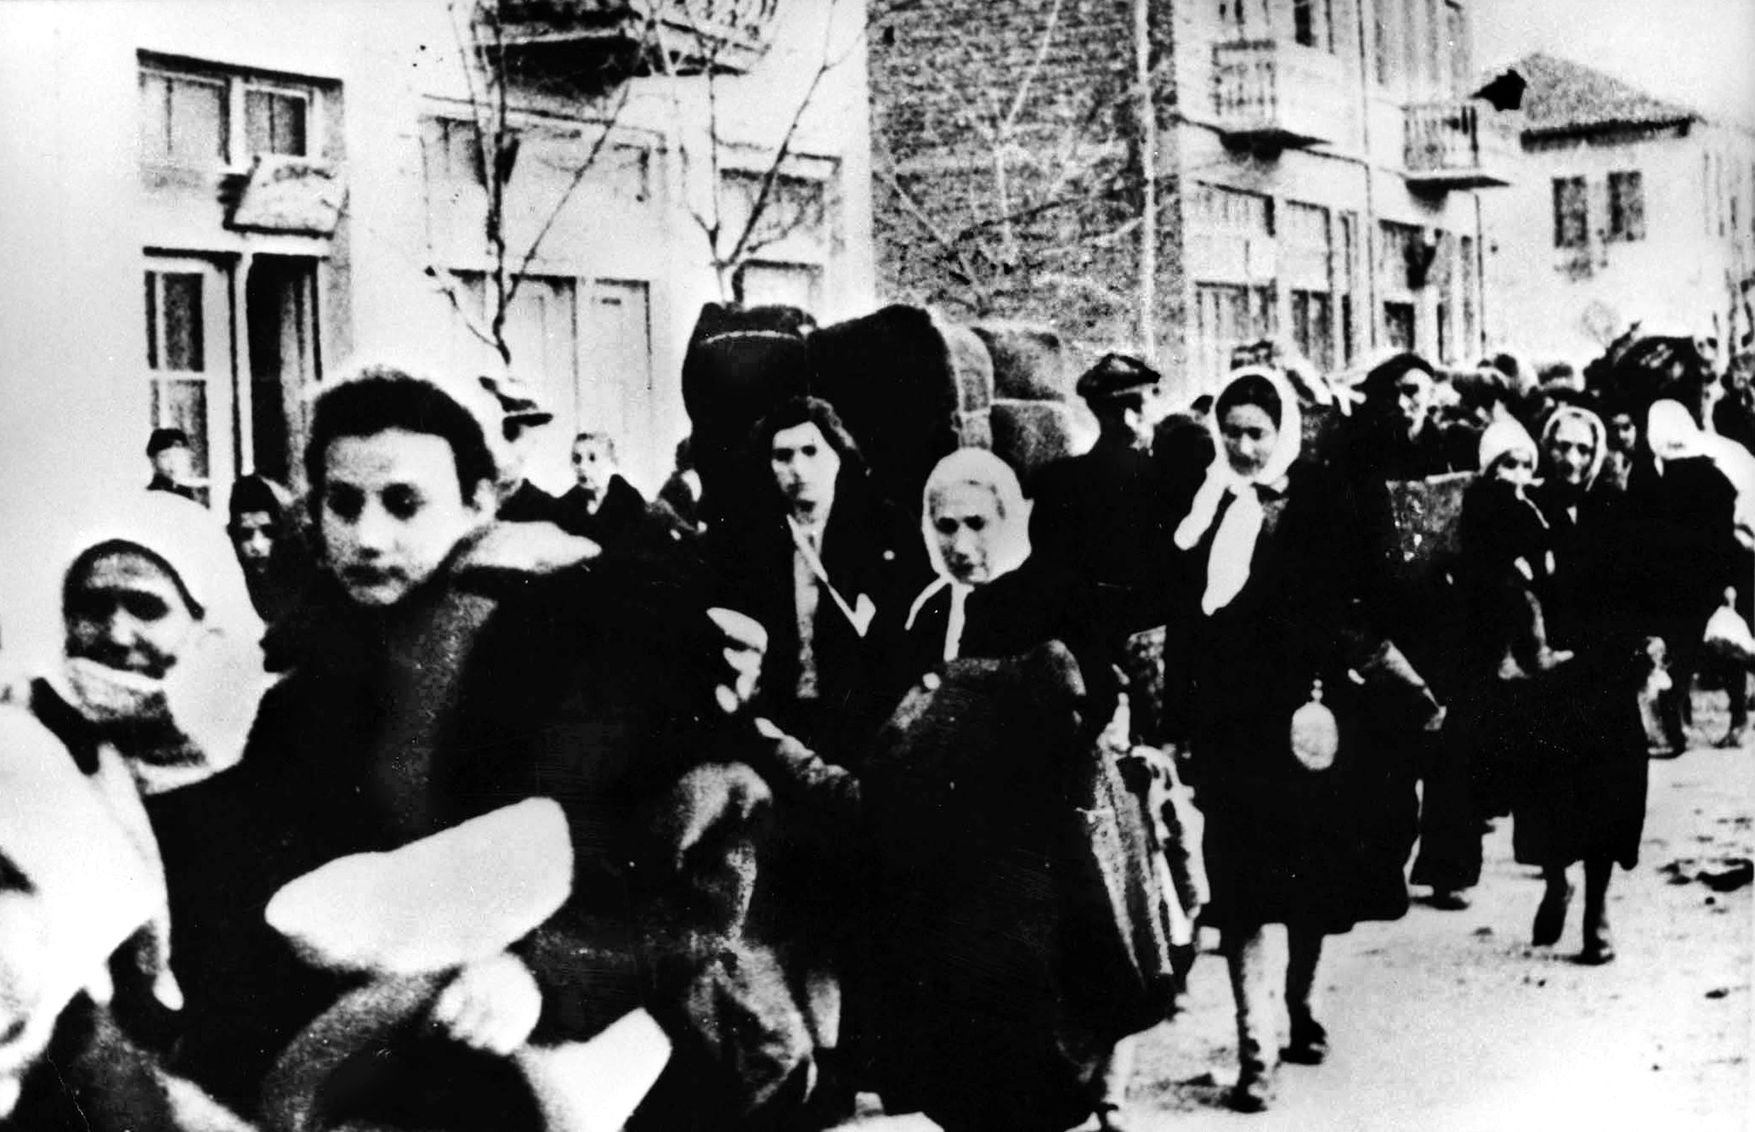 Jews being deported from Macedonia to the Treblinka Death Camp in occupied Poland, March 1943. A month earlier, Bulgaria signed an agreement with Germany to deport 20,000 Jews—from Macedonia and northern Thrace, which it had annexed in 1941, and from Bulgaria itself. It is estimated that only 200 Macedonian Jews survived the war.